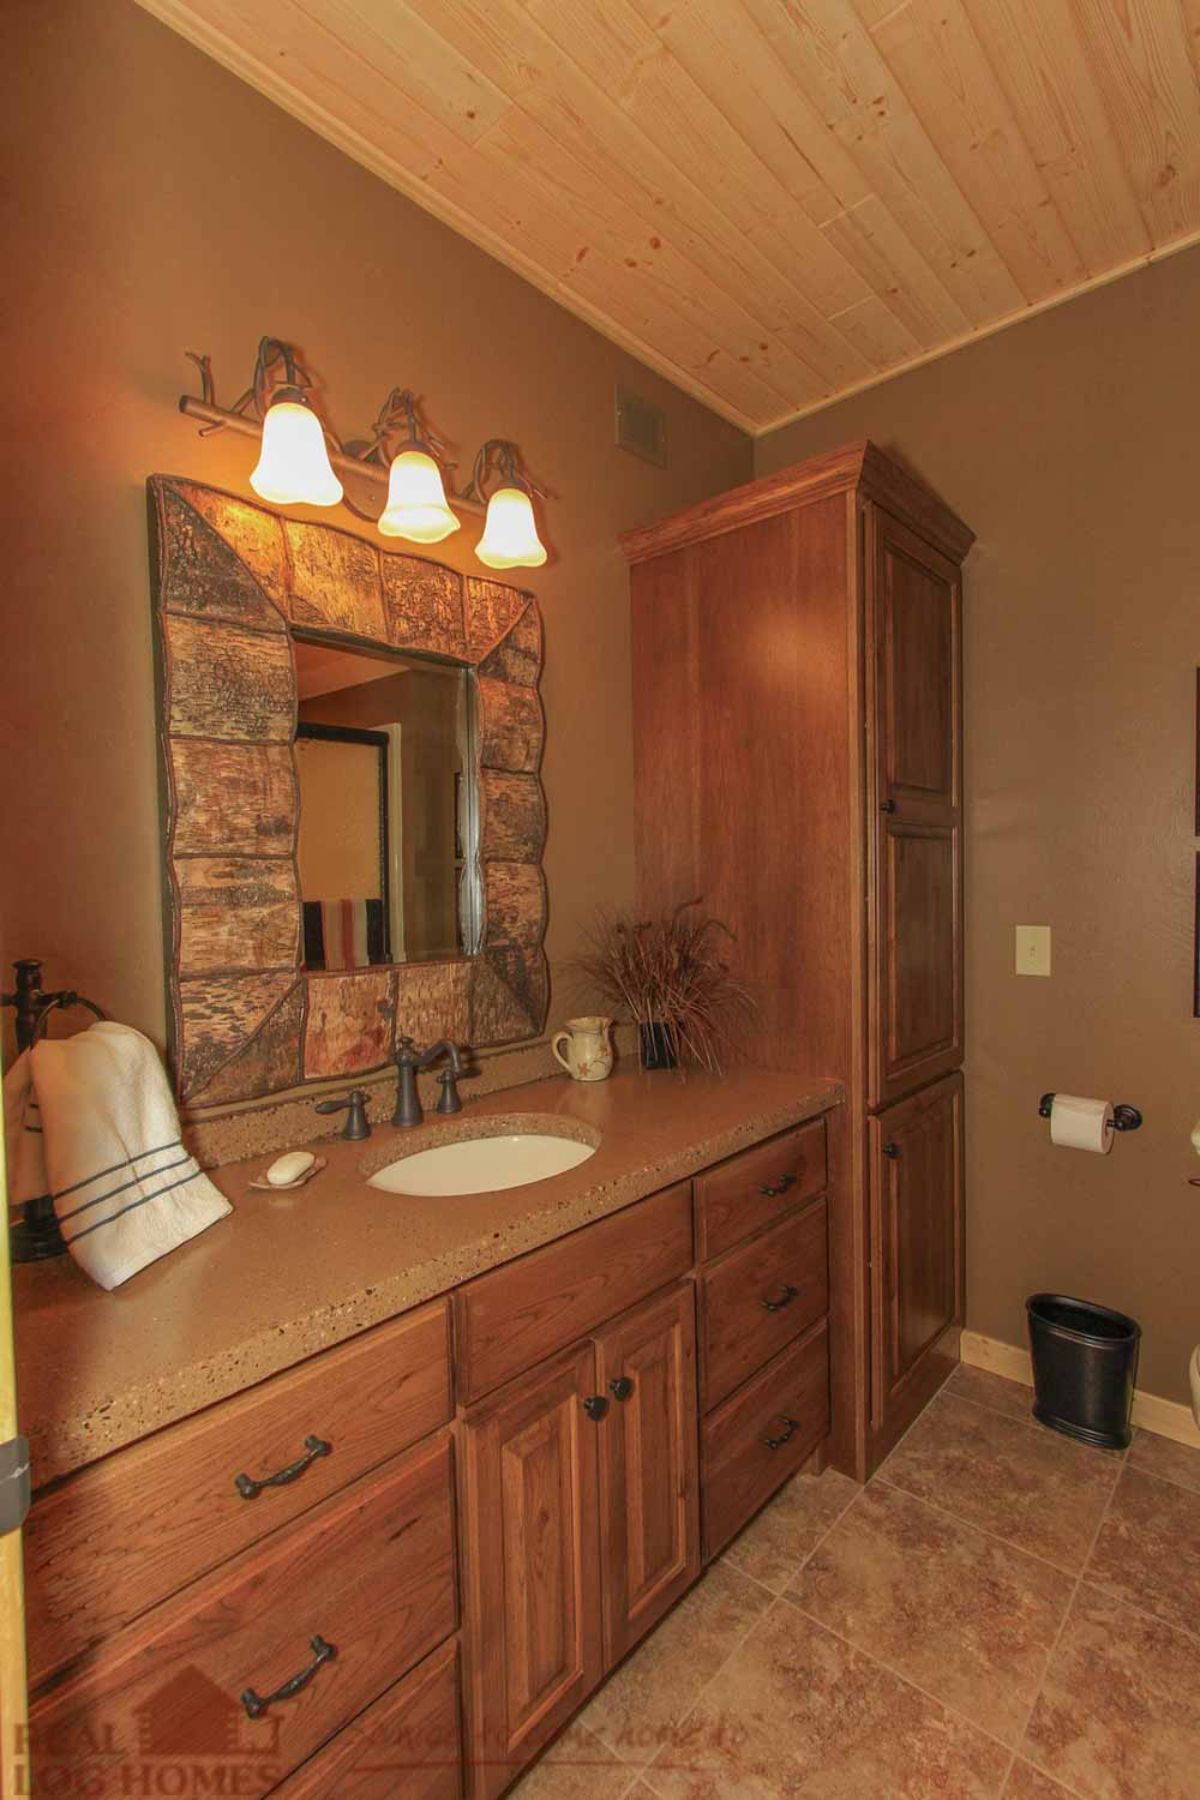 wood cabinets in bathroom with stone surrounding mirror